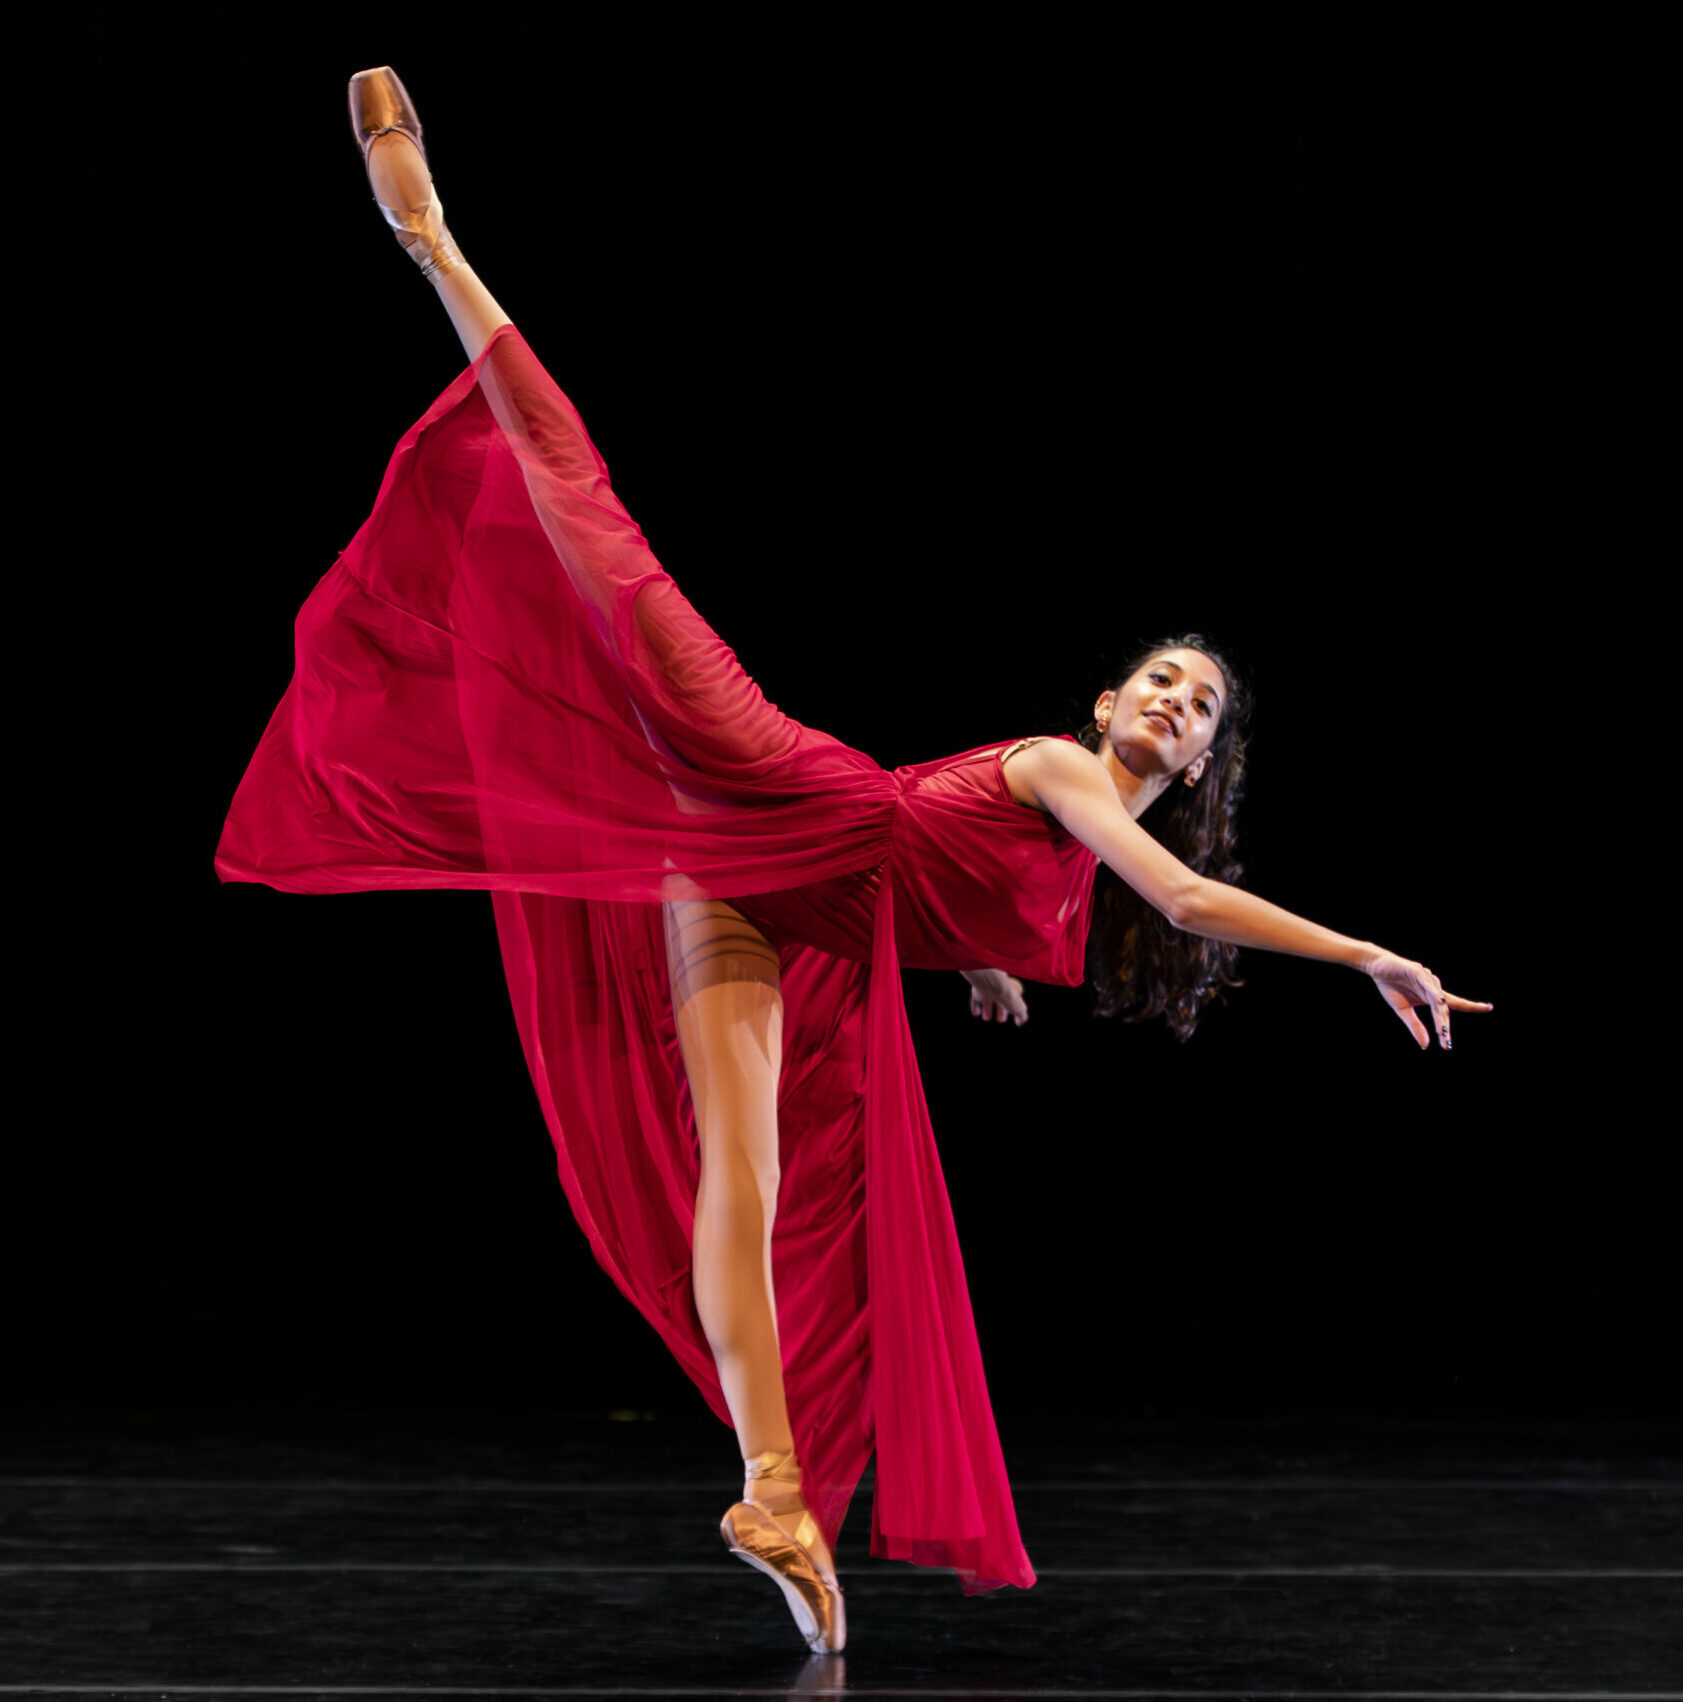 Dancer in long, red costume in a tilted arabesque